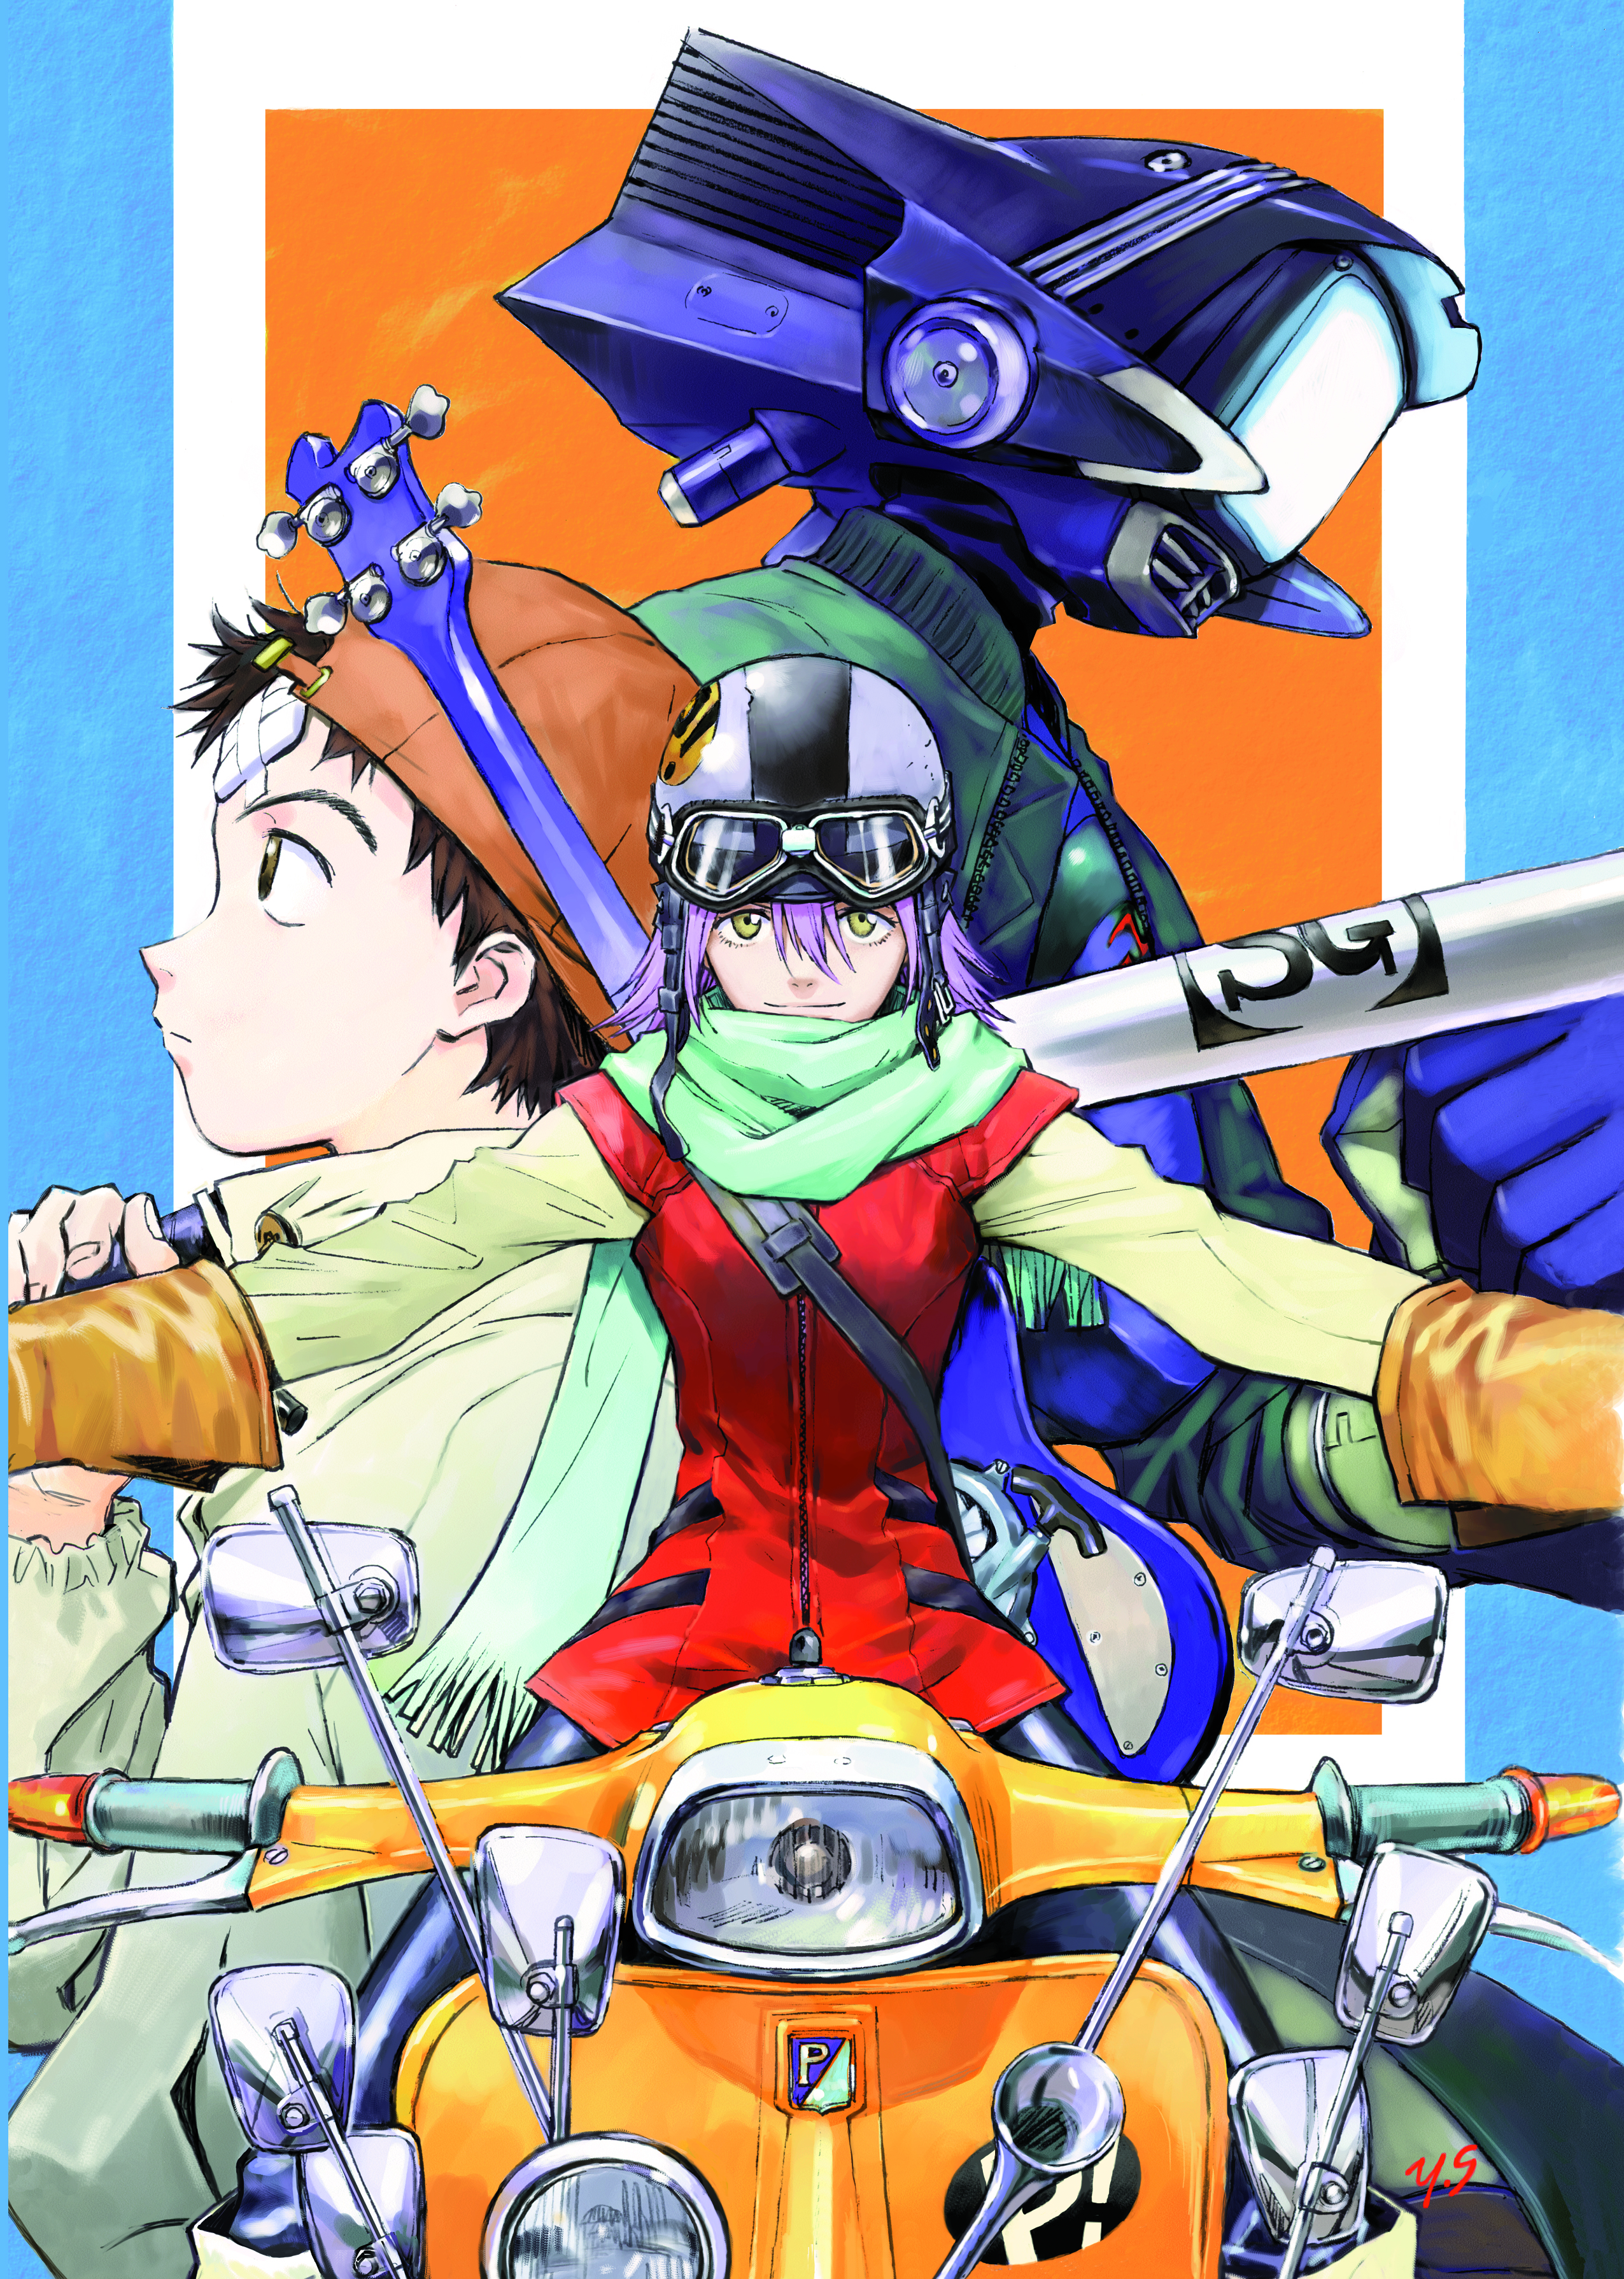 Production I.G. to present FLCL 2 Panel with Creator and Haruko's Voice